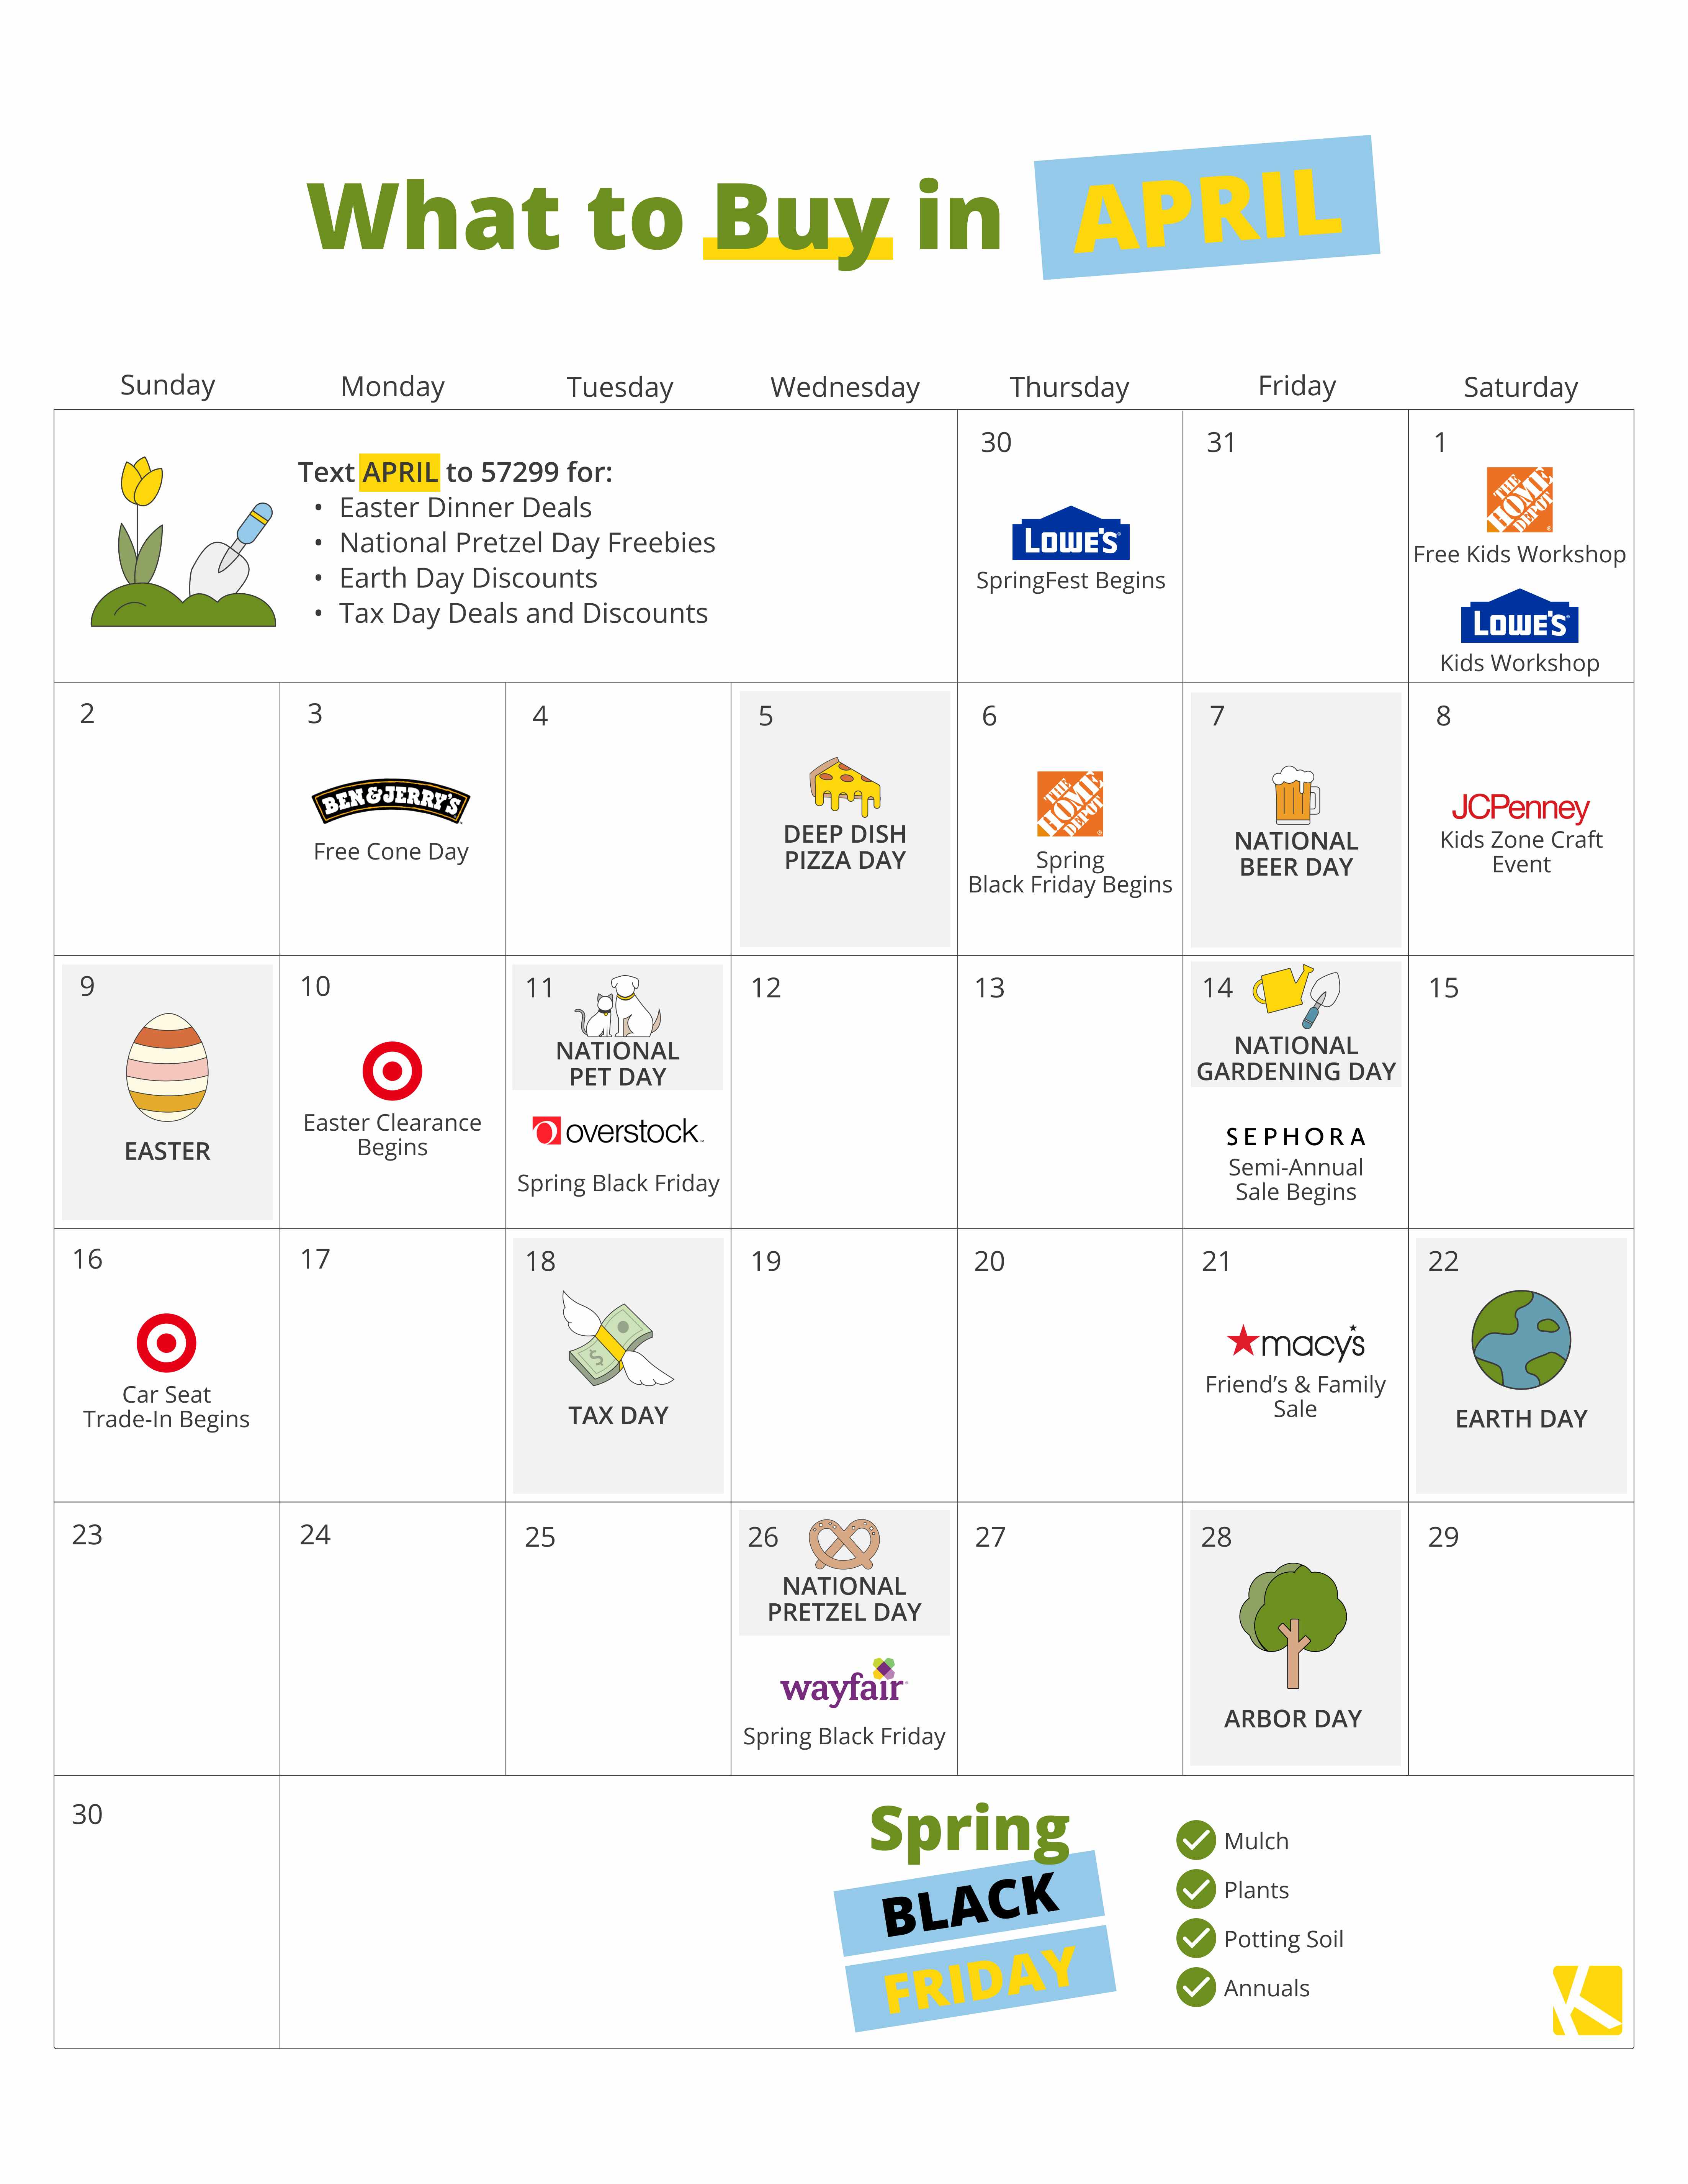 A calendar showing when to buy certain things in April